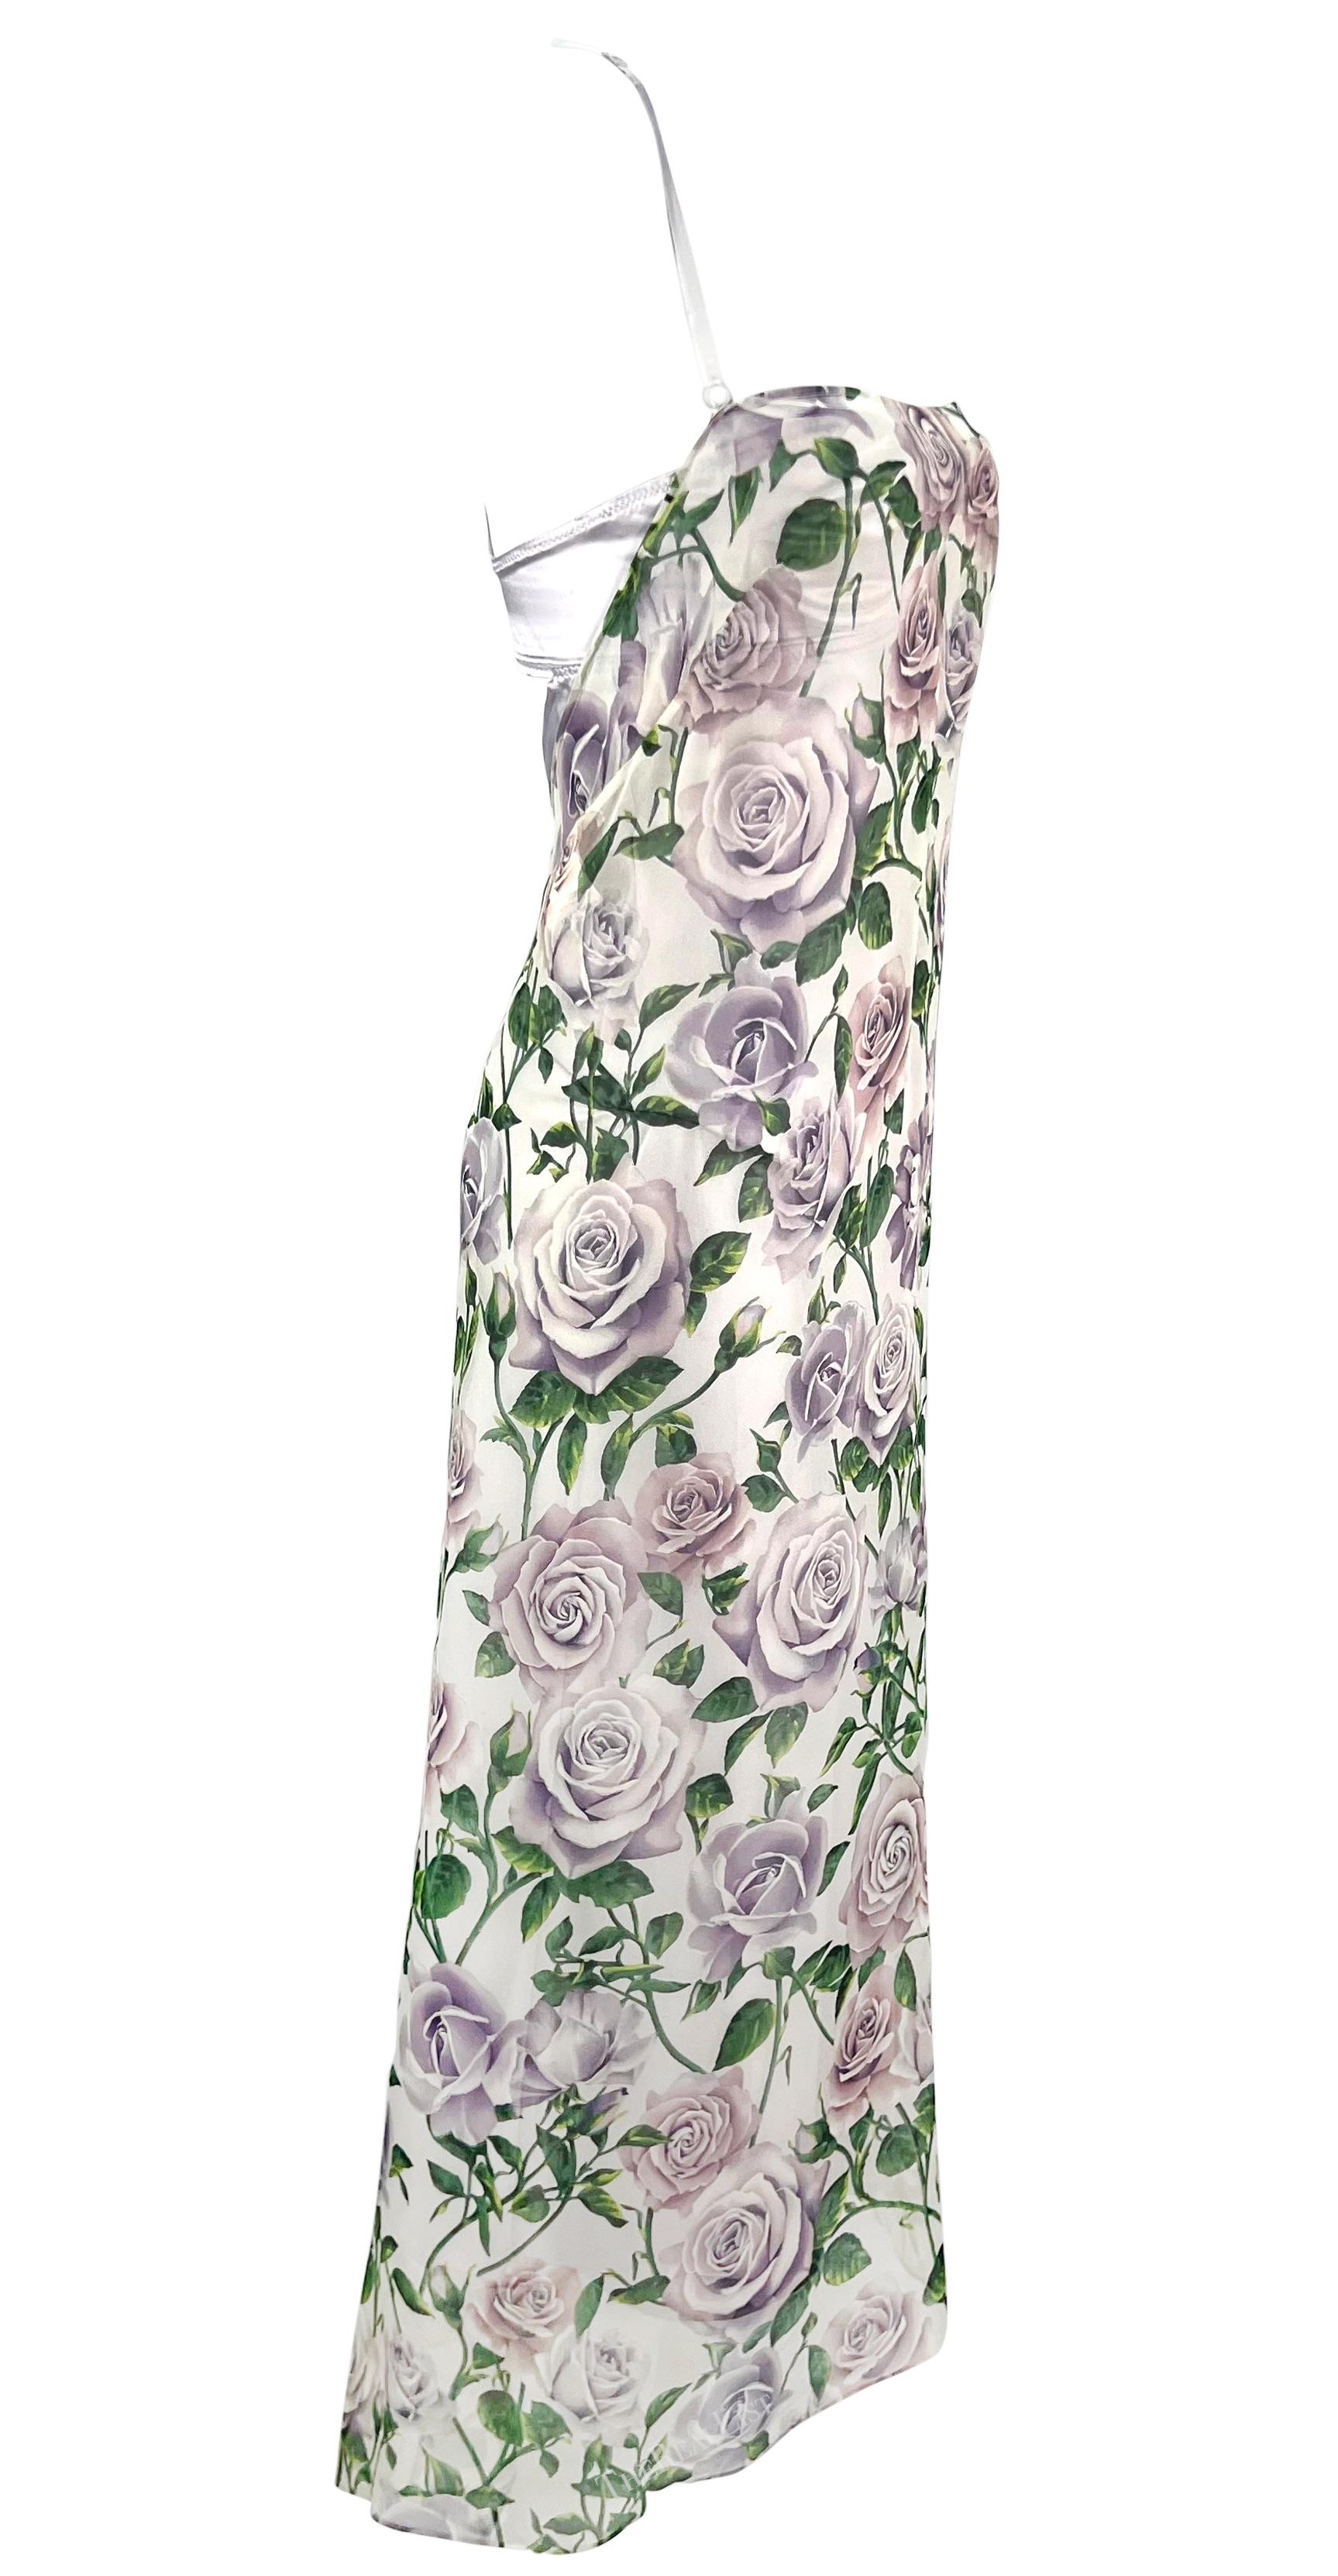 Early 2000s Dolce & Gabbana Sheer Chiffon White Purple Rose Print Overlay Gown For Sale 1